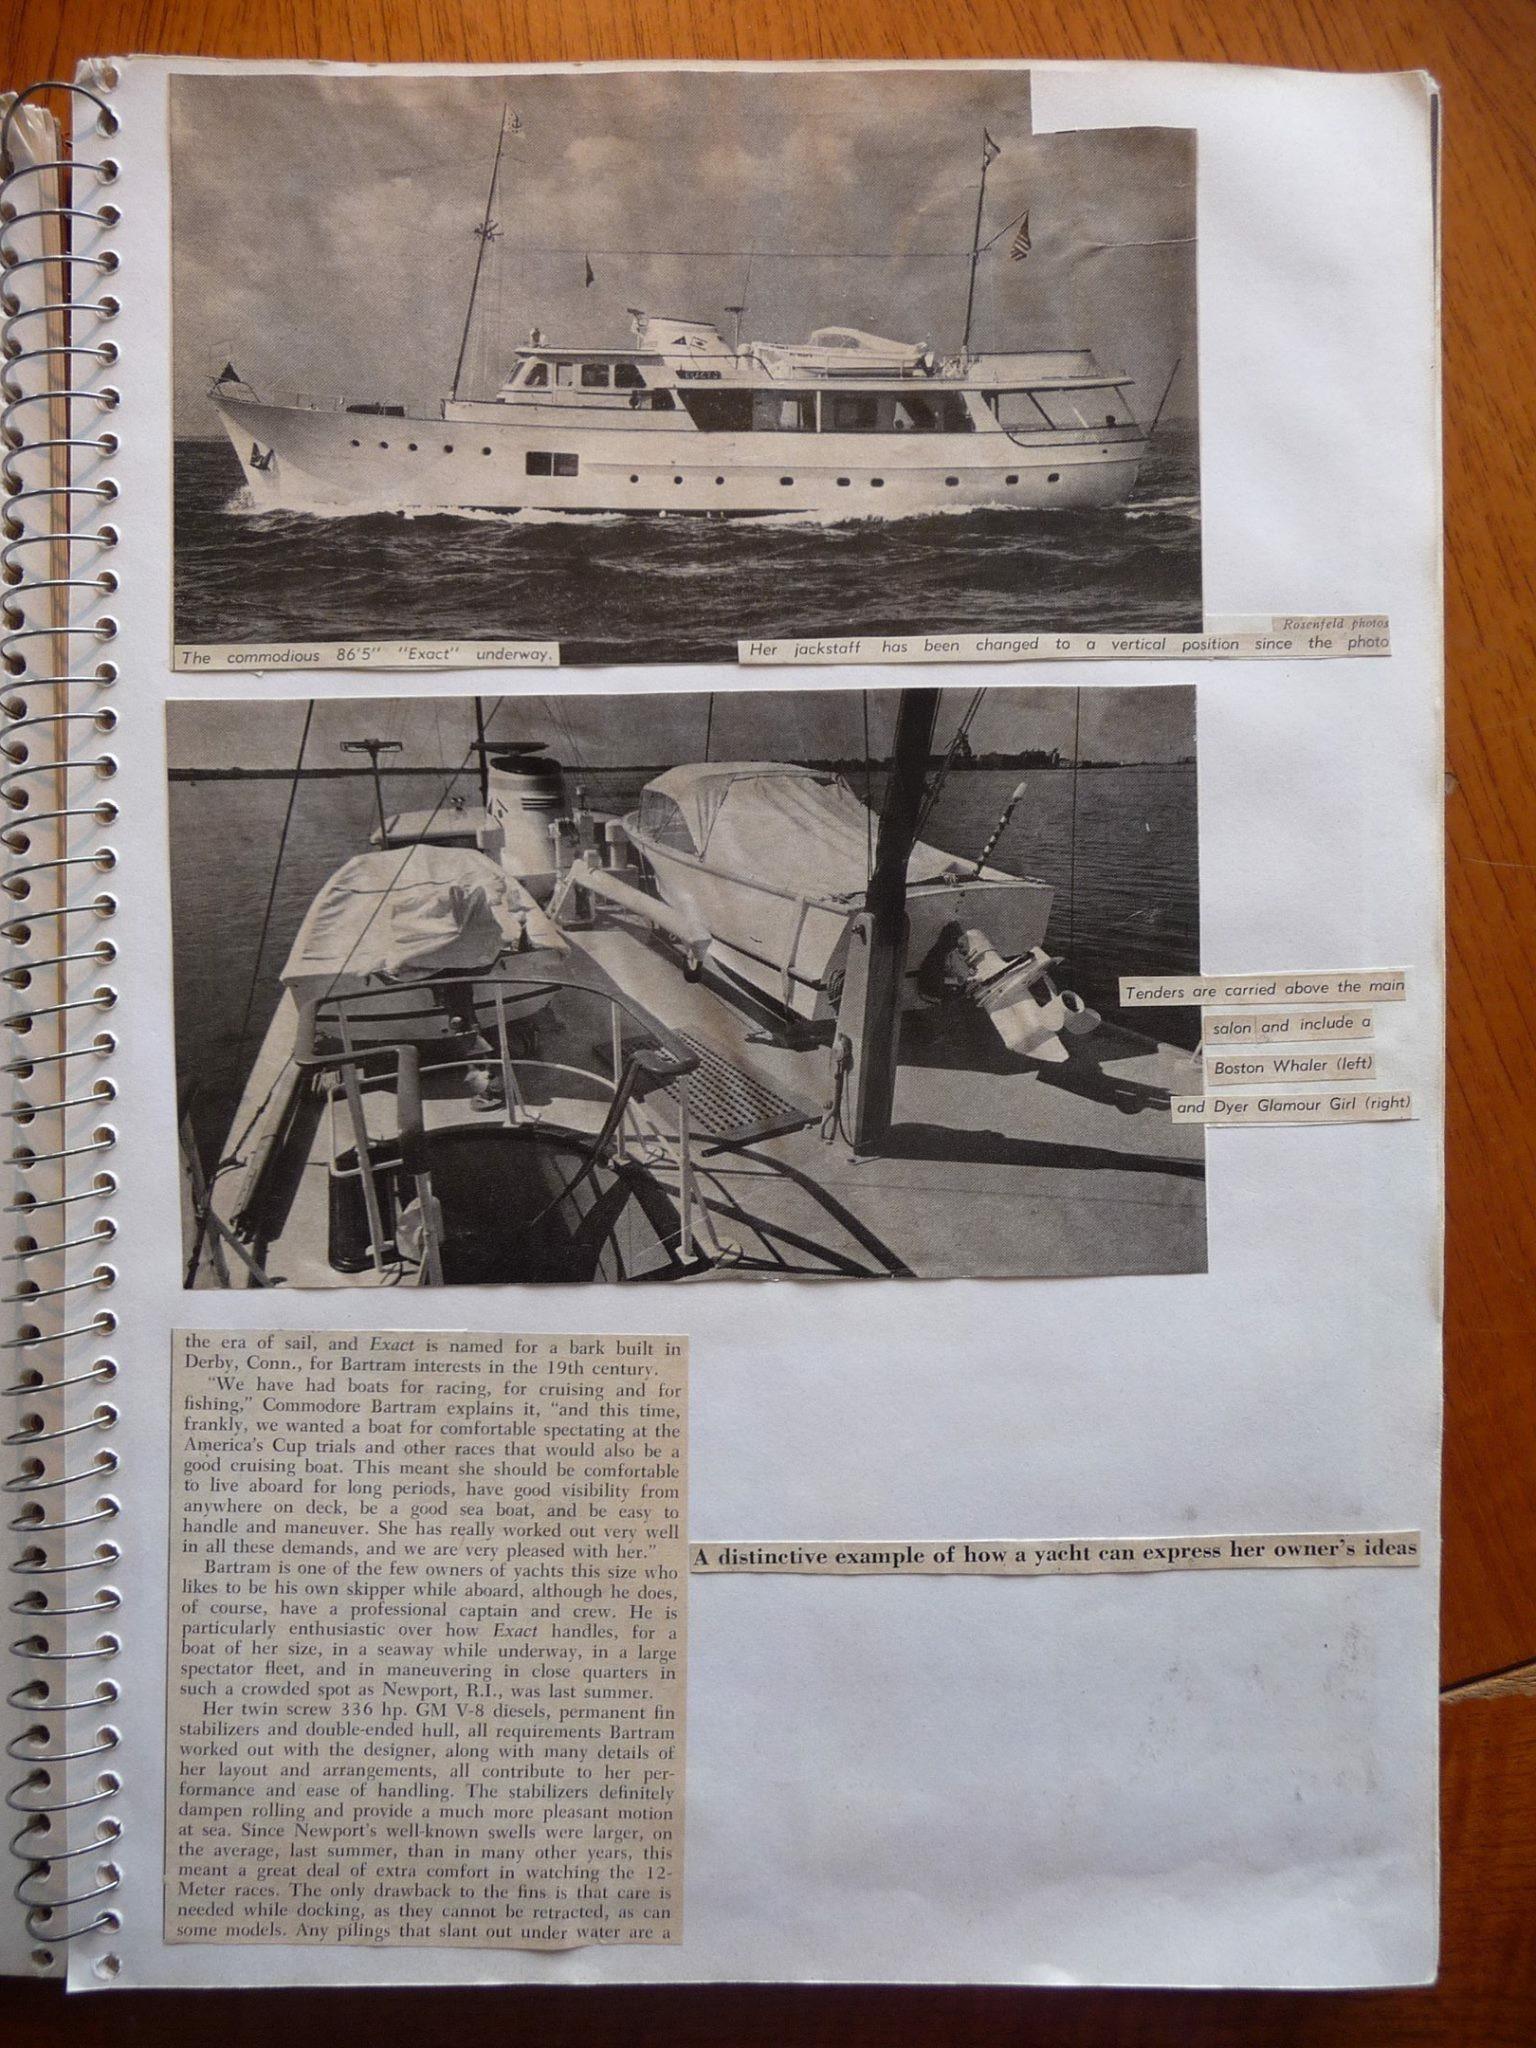 Yachting Magazine - March 1965 (page 2)